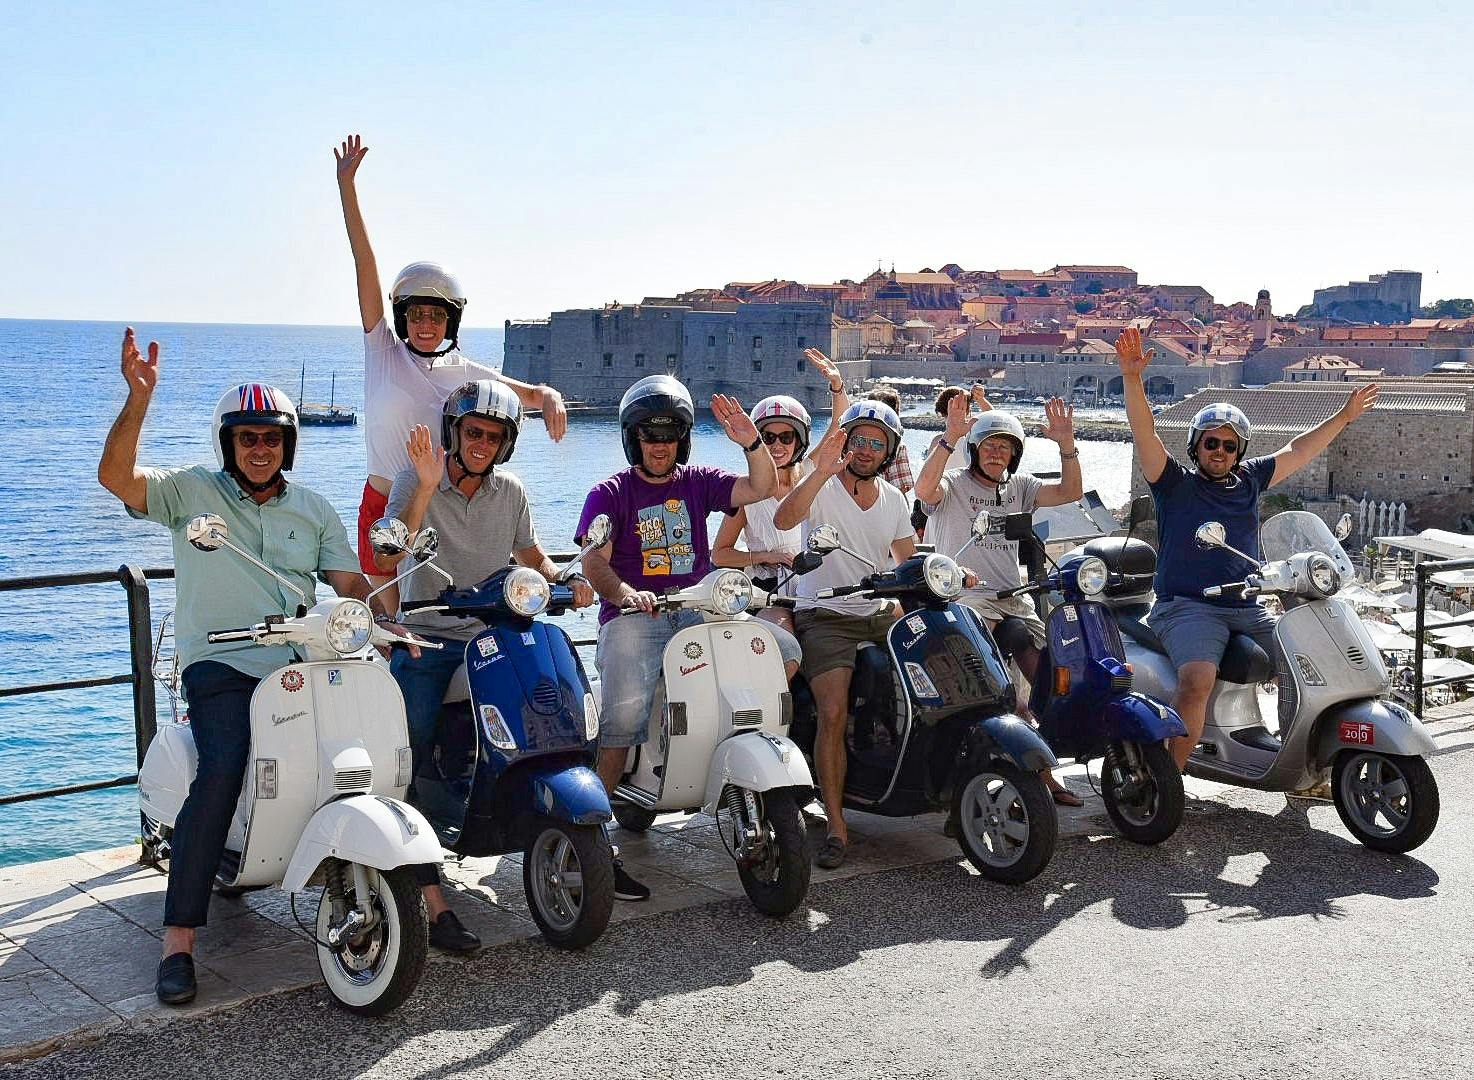 Guided Vespa tour of Dubrovnik